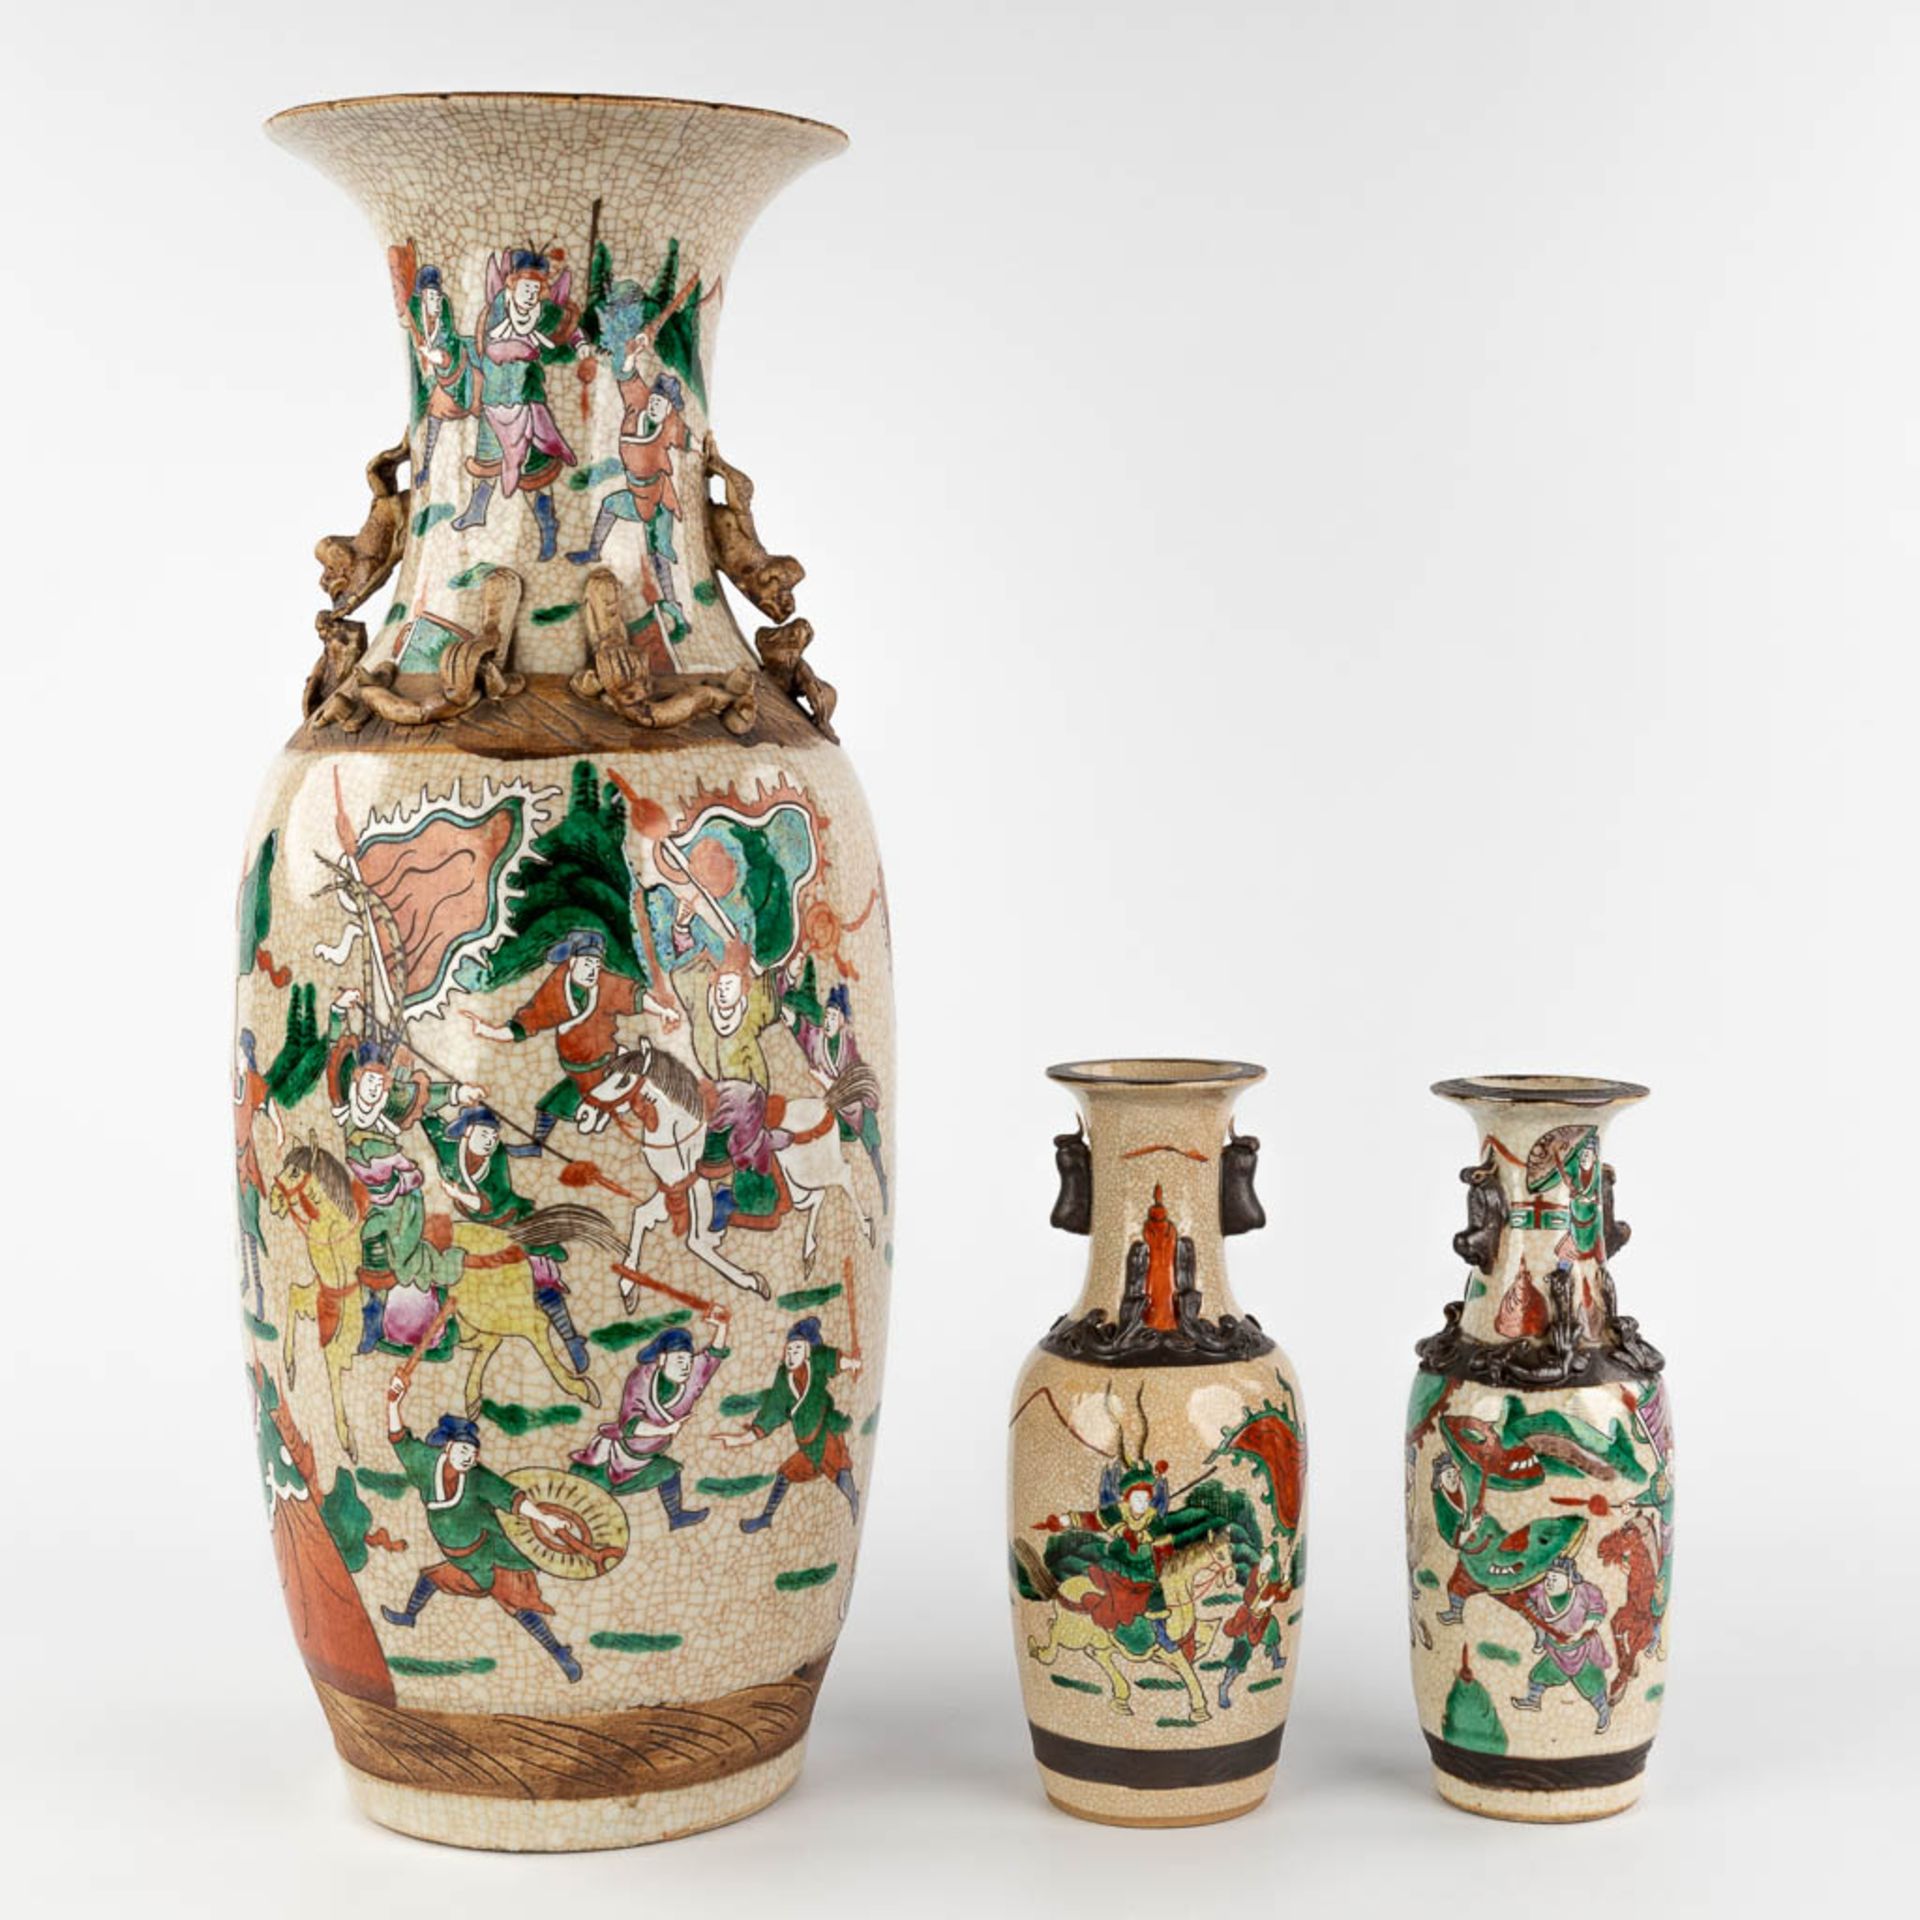 A large Chinese Nanking vase, added two smaller vases. 20th C. (H:58 x D:22 cm) - Image 3 of 25